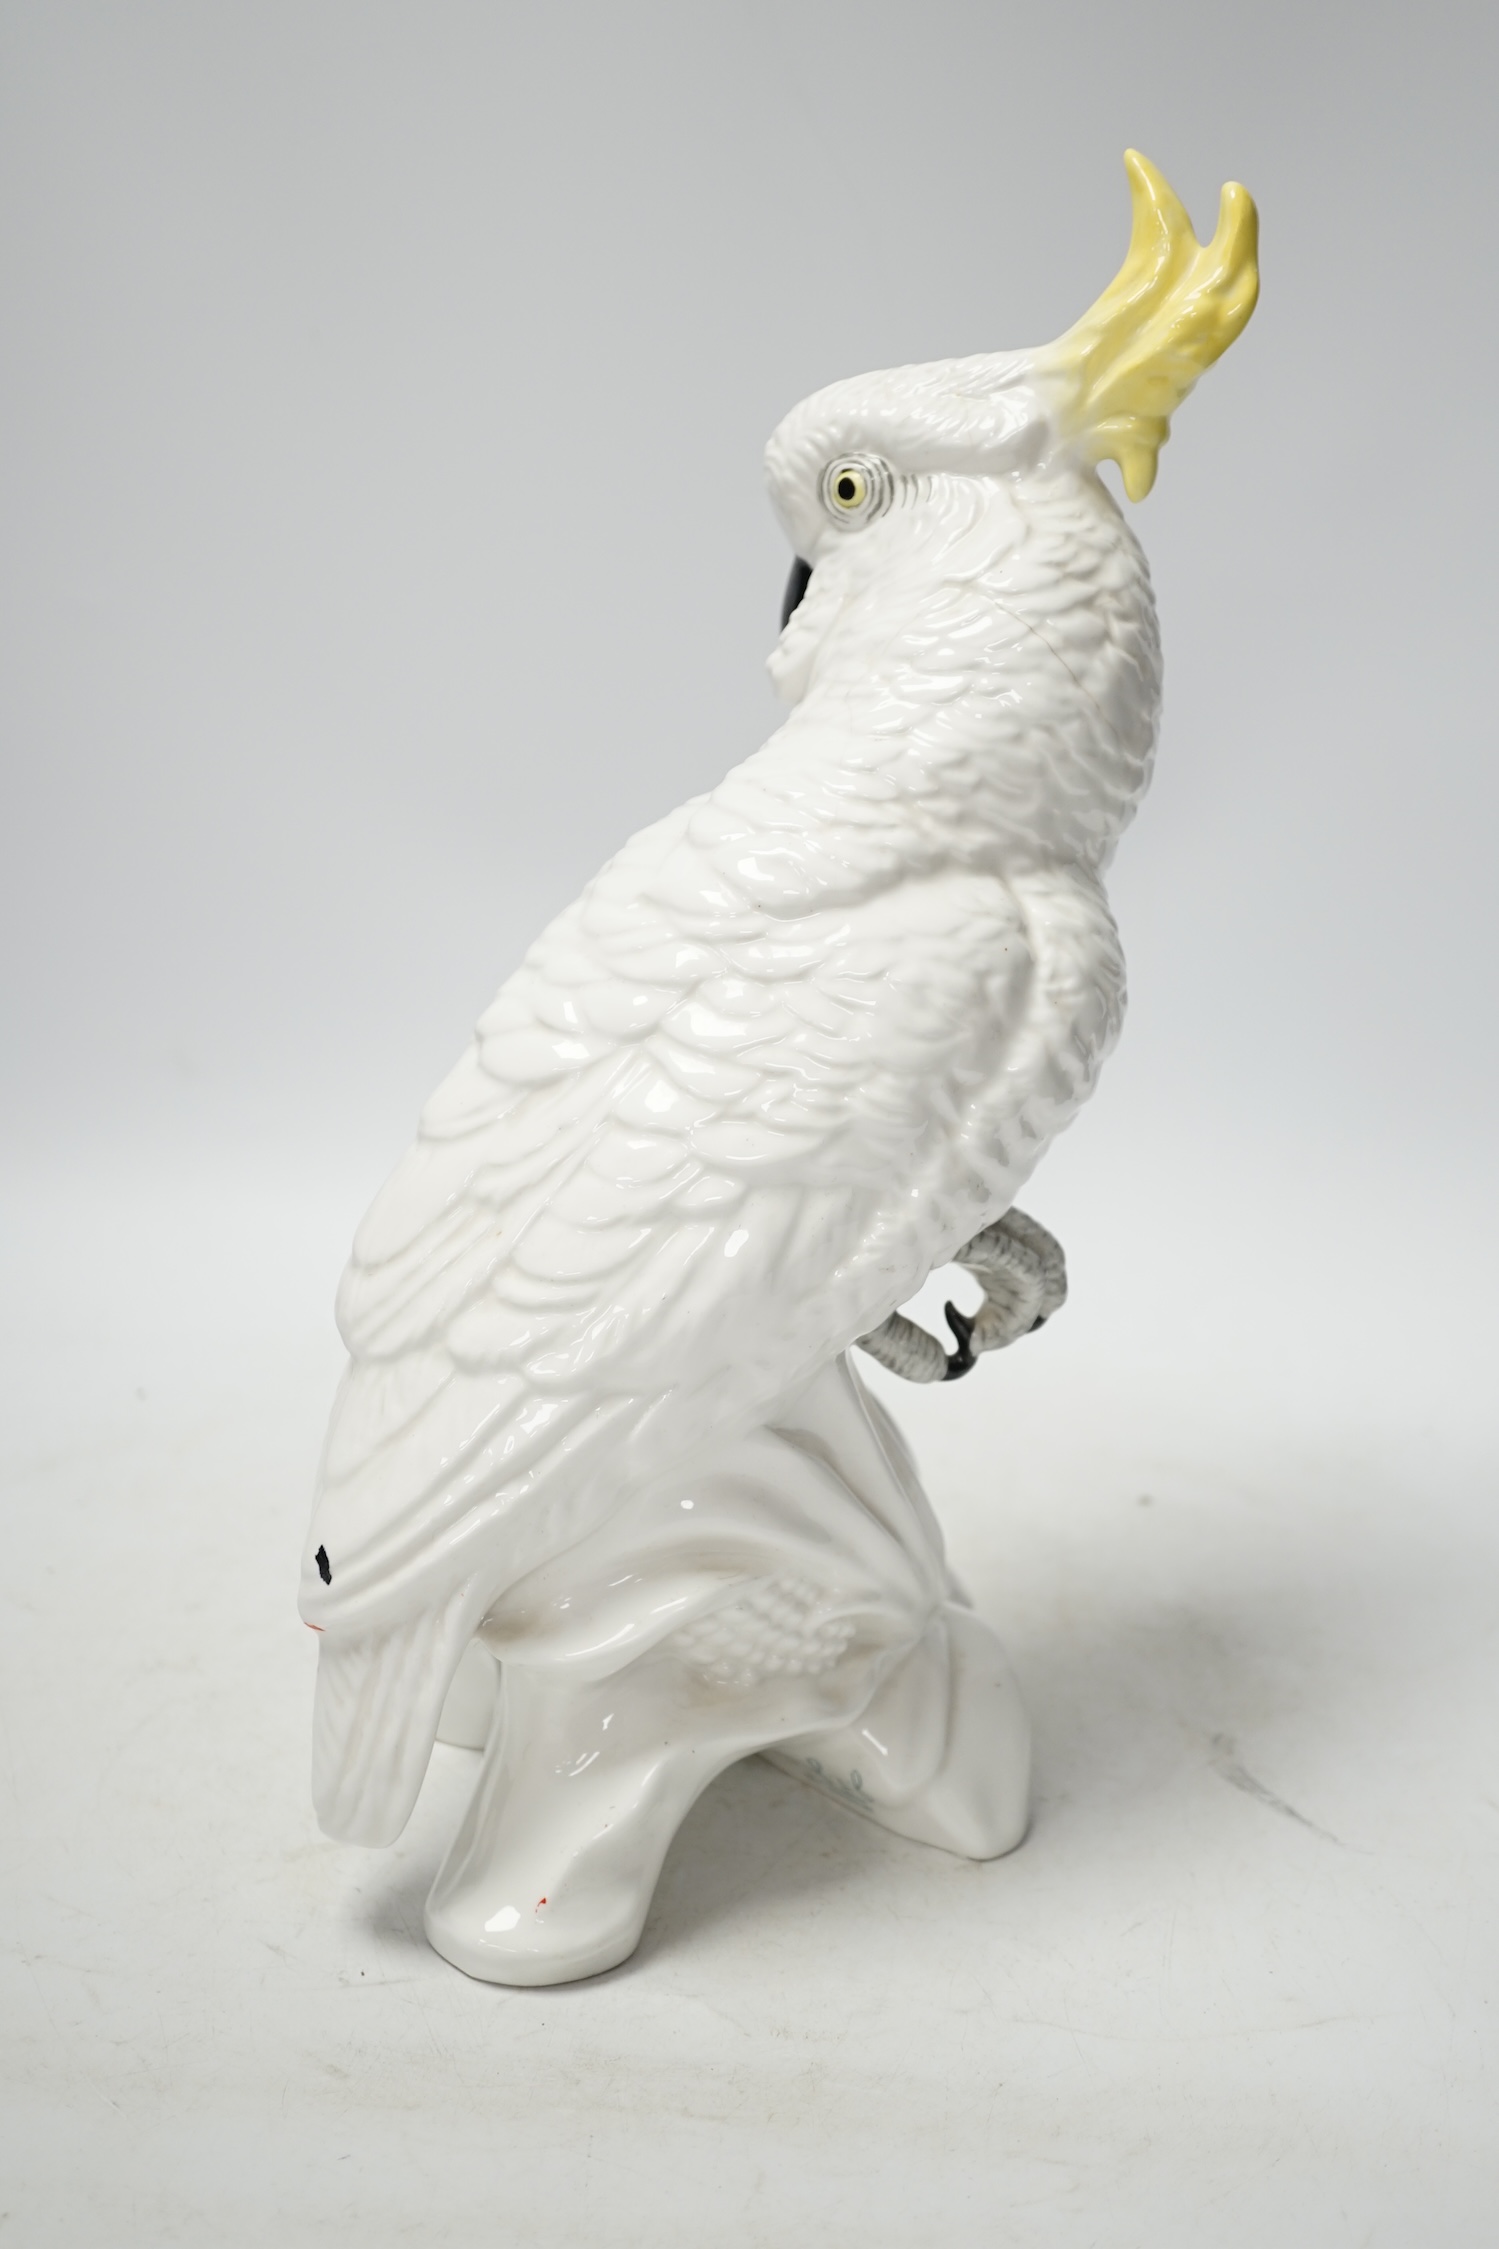 A Doulton and Slater’s patent stoneware vase and a Royal Staffordshire porcelain figure of a cockatoo, 33cm high. Condition - poor to fair condition, significant cracks to cockatoo